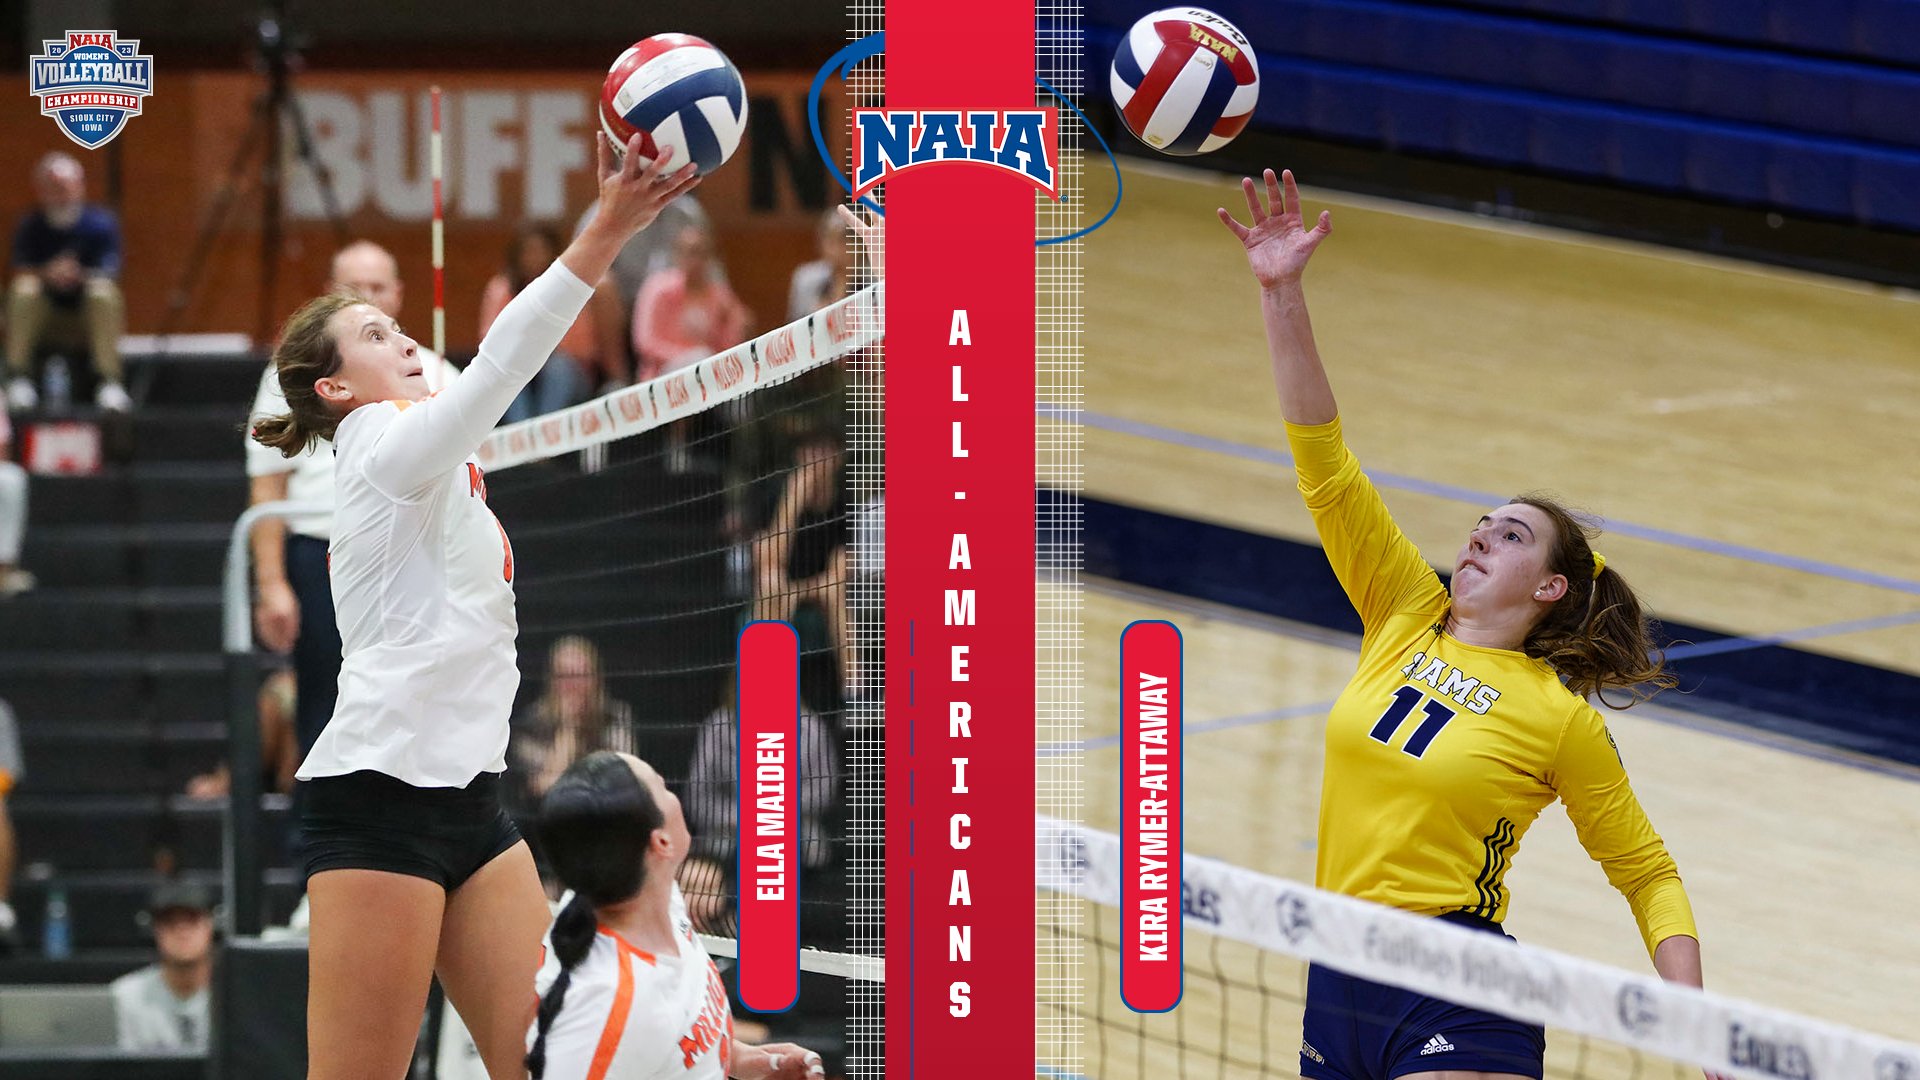 Maiden, Rymer-Attaway Collect NAIA All-American Team Honors